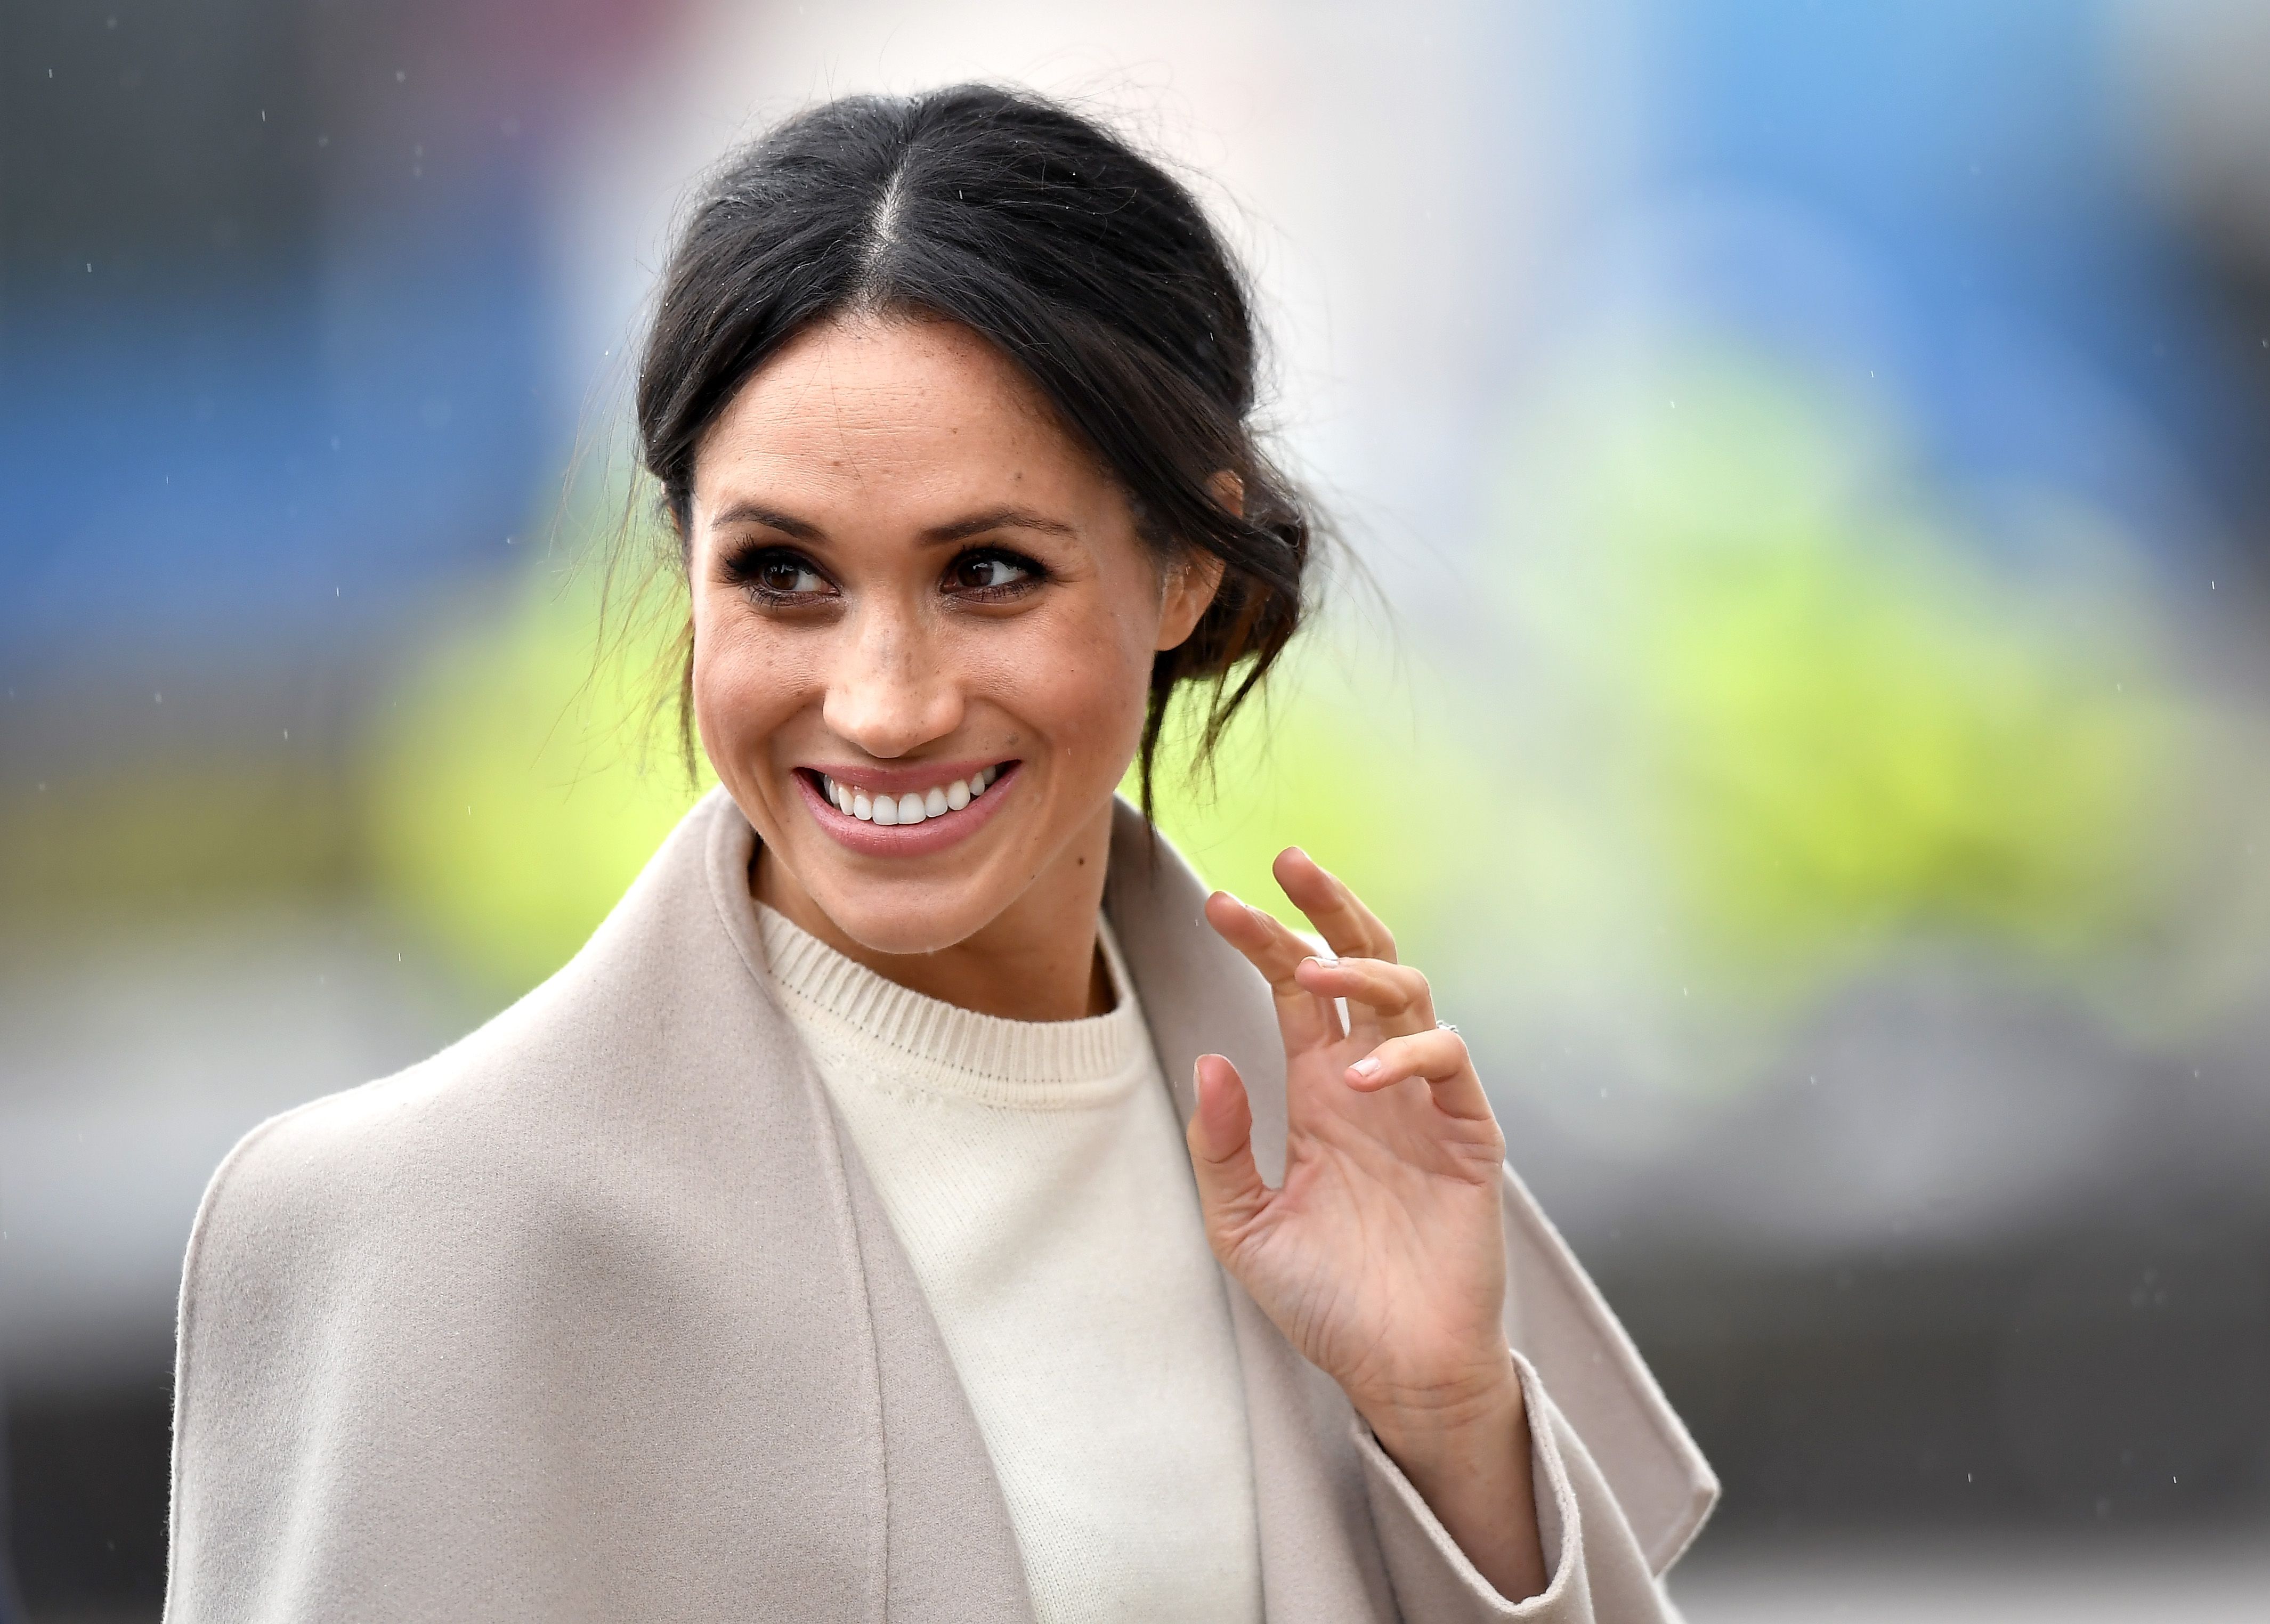 palace staffers called meghan markle demeaning names reveals new book